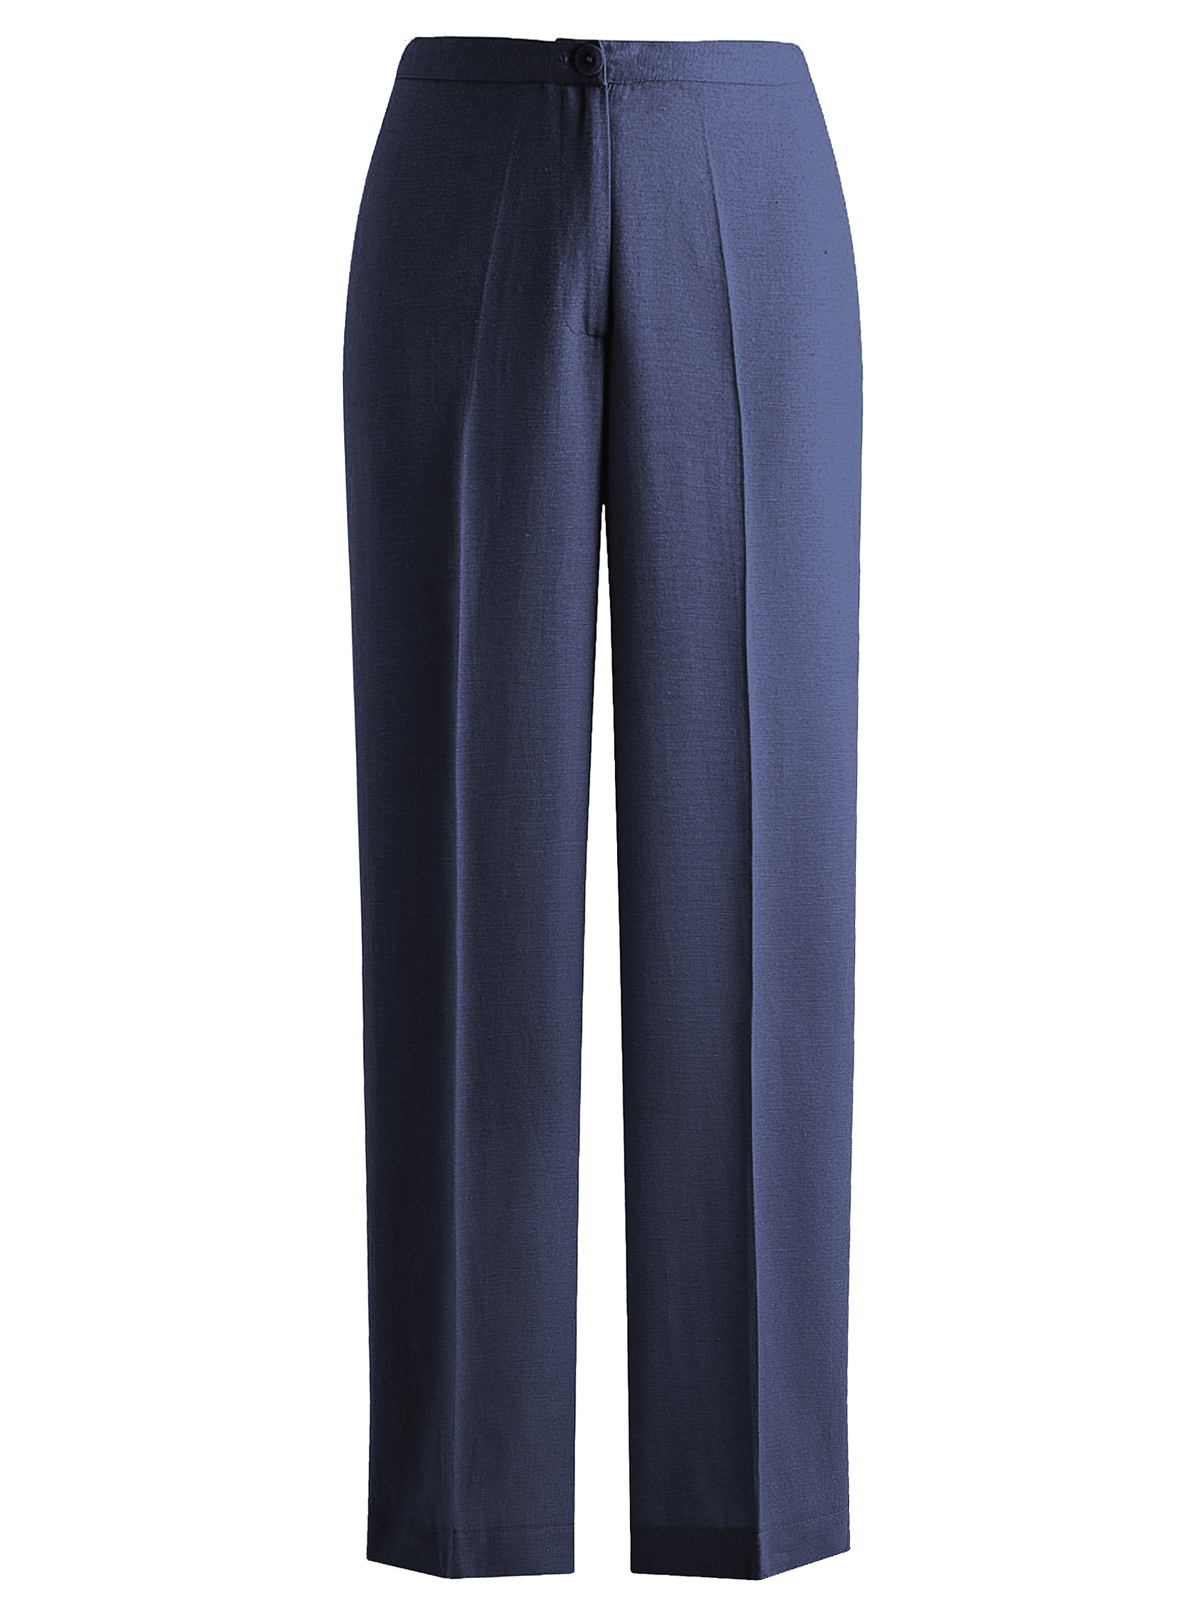 Joanna Hope - - Joanna Hope NAVY Linen Blend Trousers - Plus Size 18 to 28